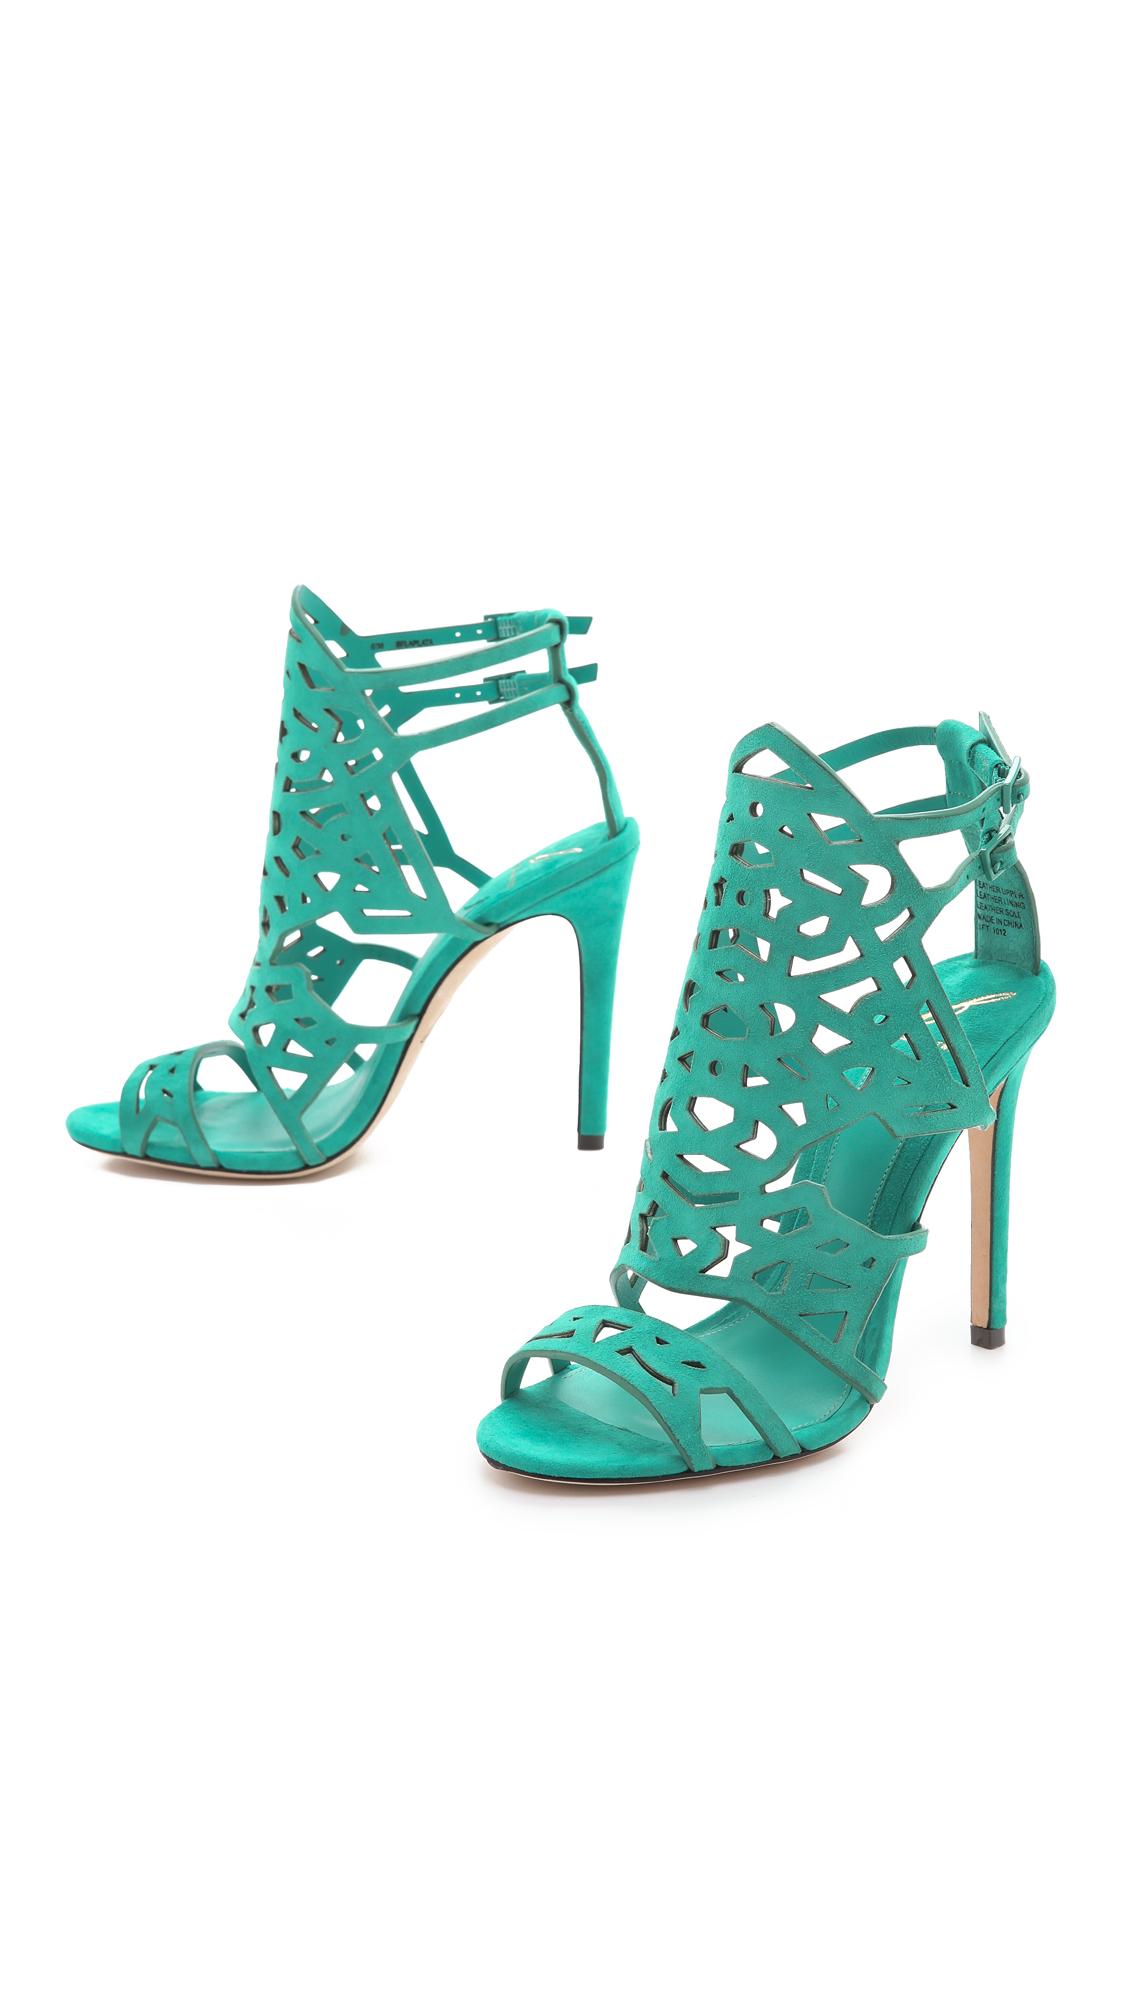 B brian atwood Laplata Sandals in Green | Lyst